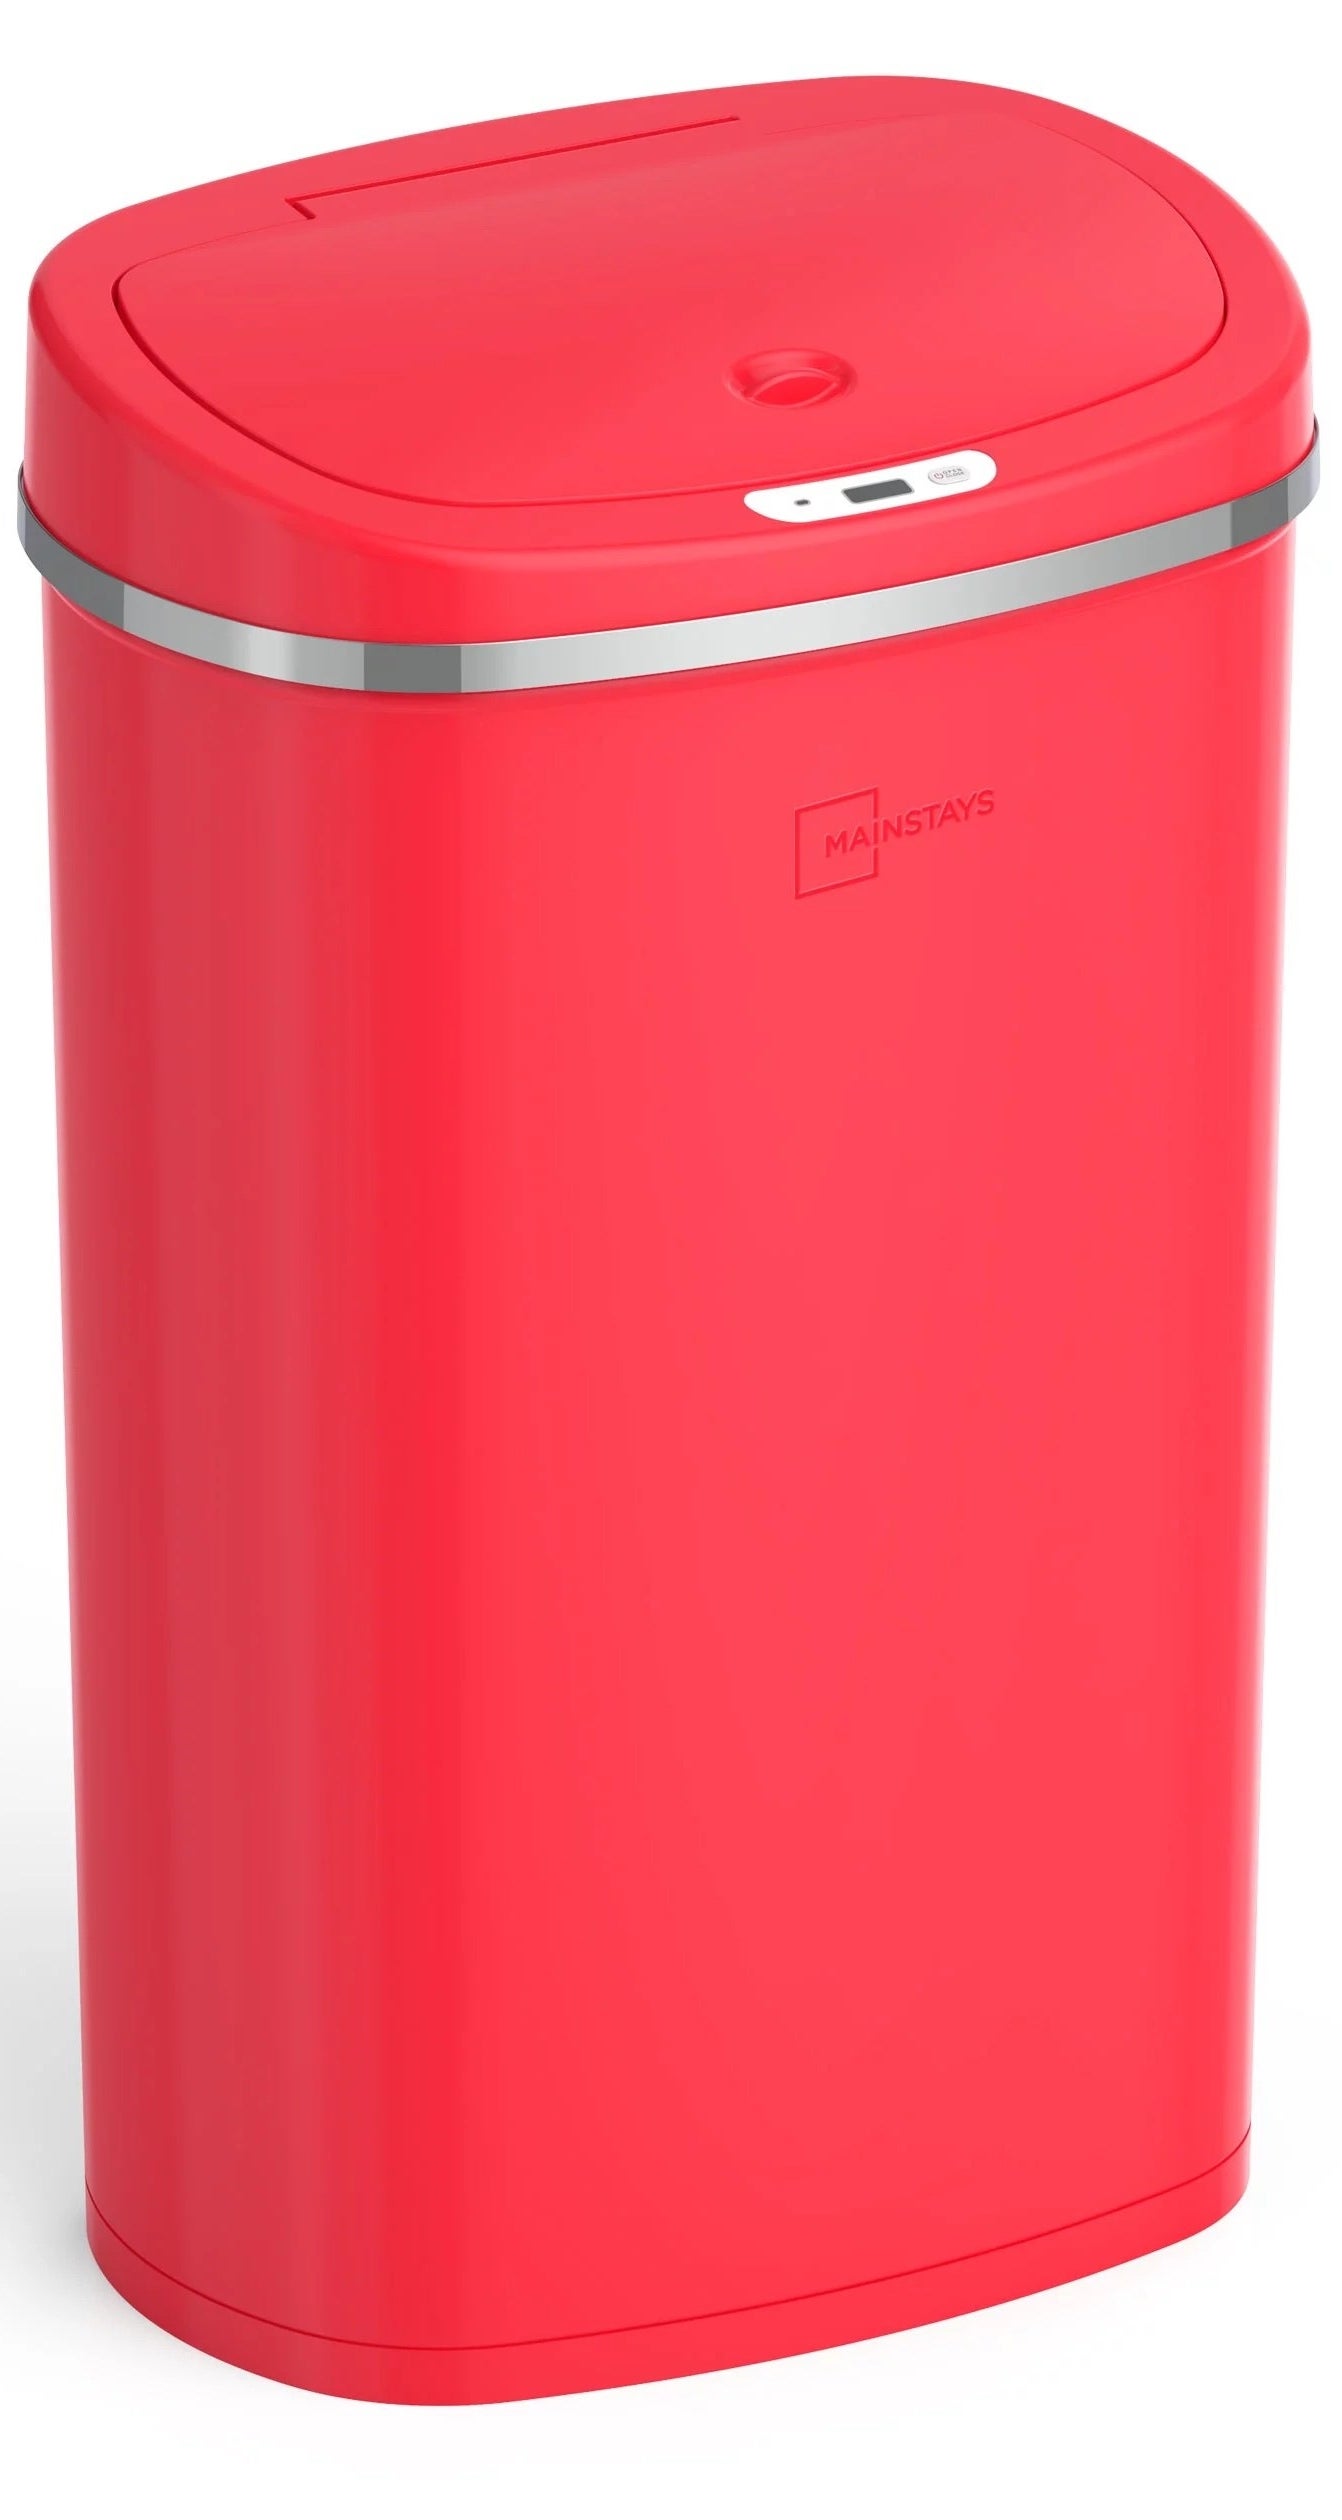 a red motion-detected garbage can